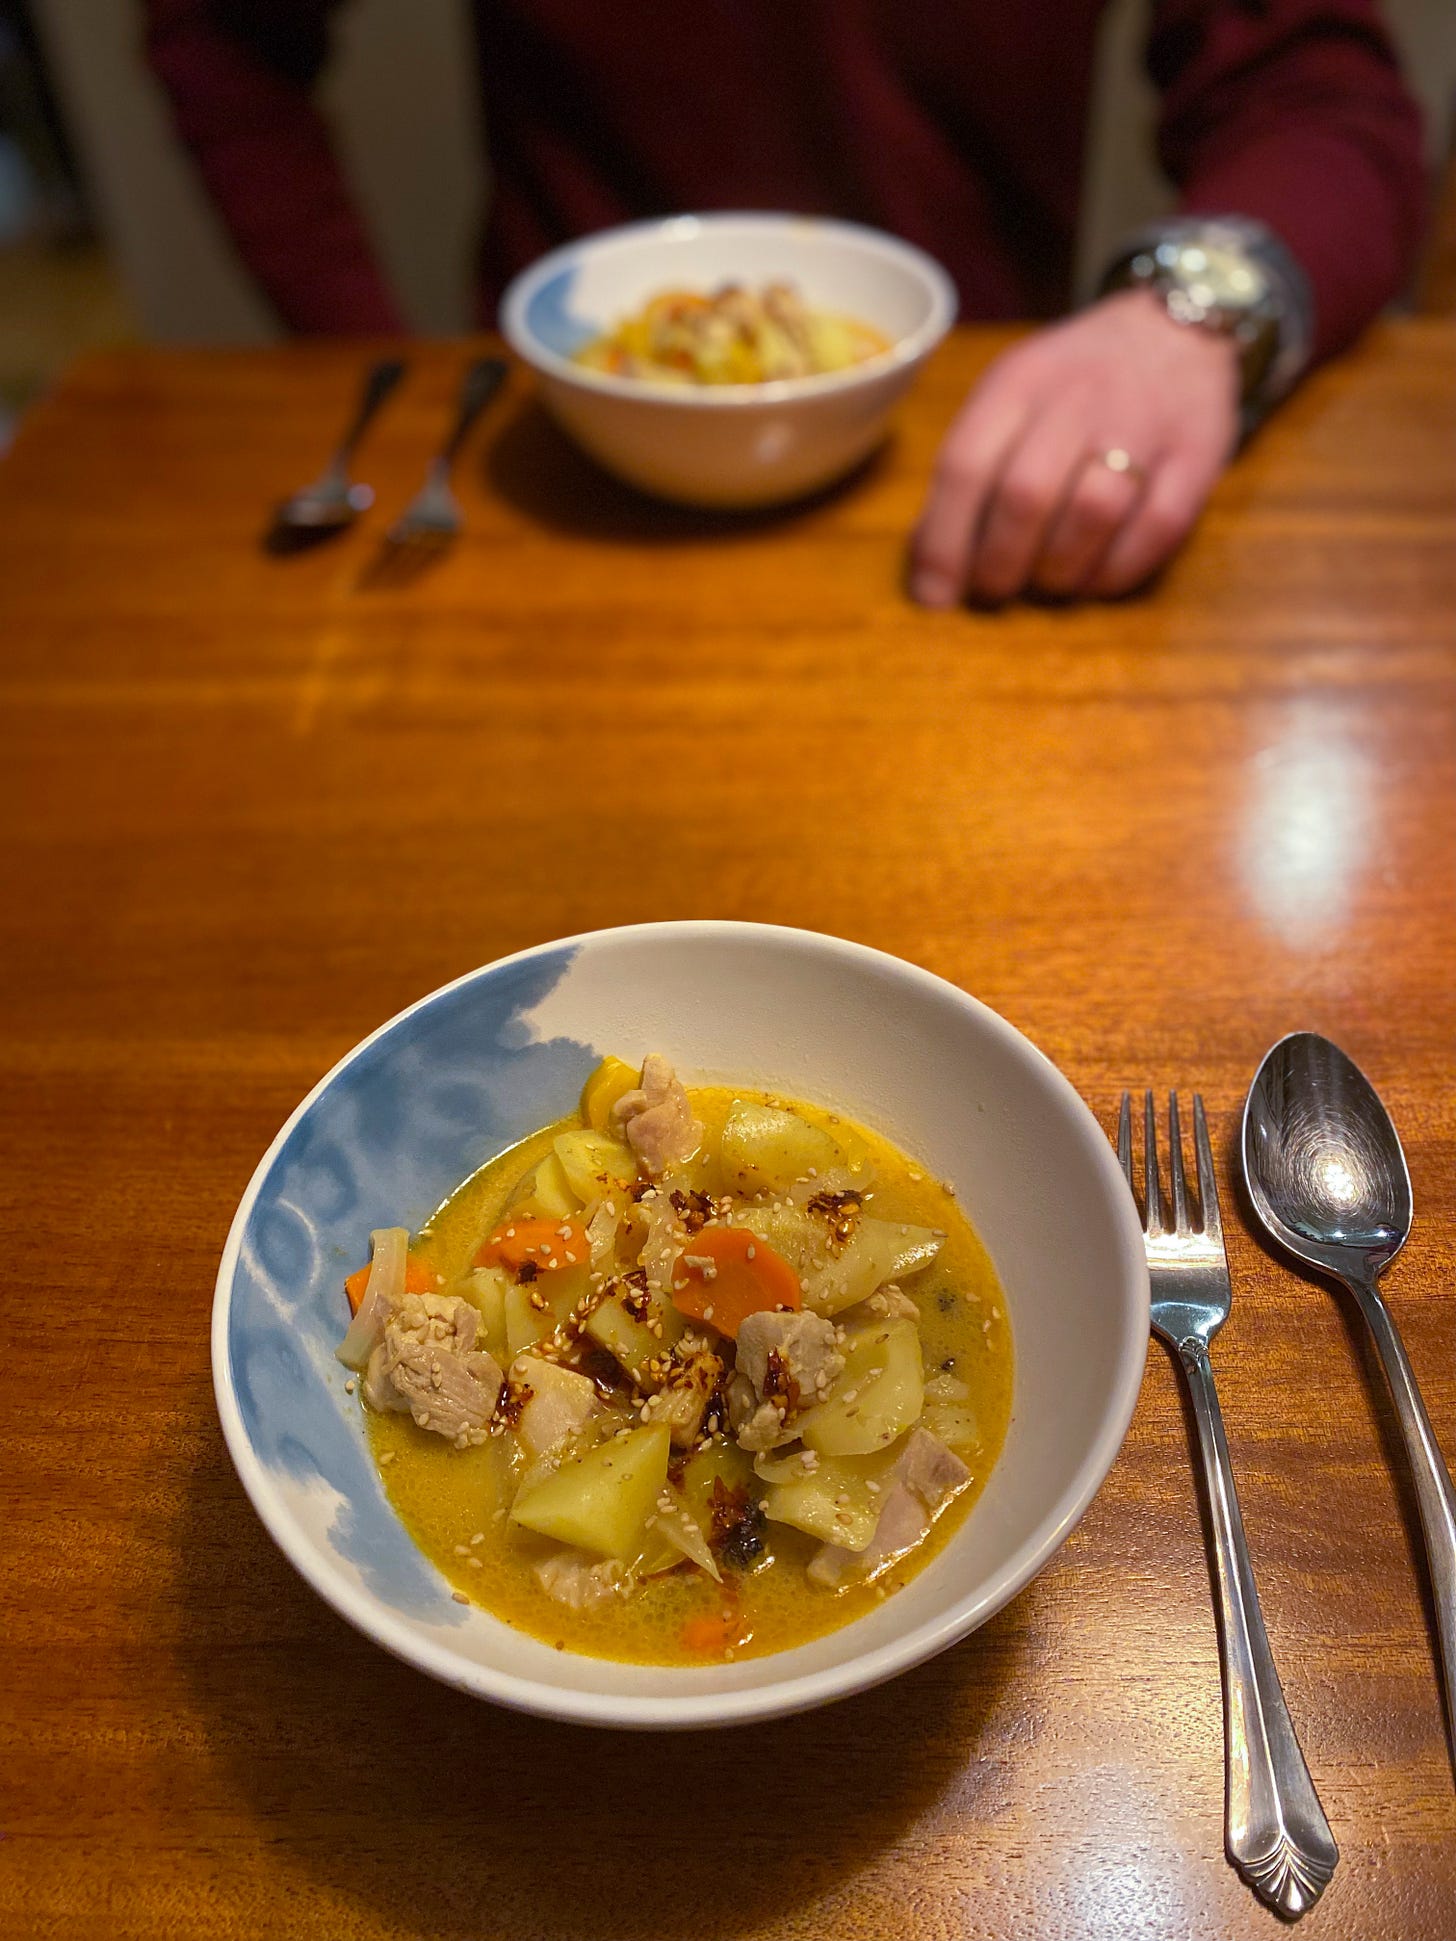 Two white and blue bowls of yellow curry with chicken, potatoes, carrots, & peppers across from each other on the table. The curry is topped with sesame seeds and chili oil, and next to each bowl are a fork and spoon. Jeff's hand rests next to his bowl across the table.